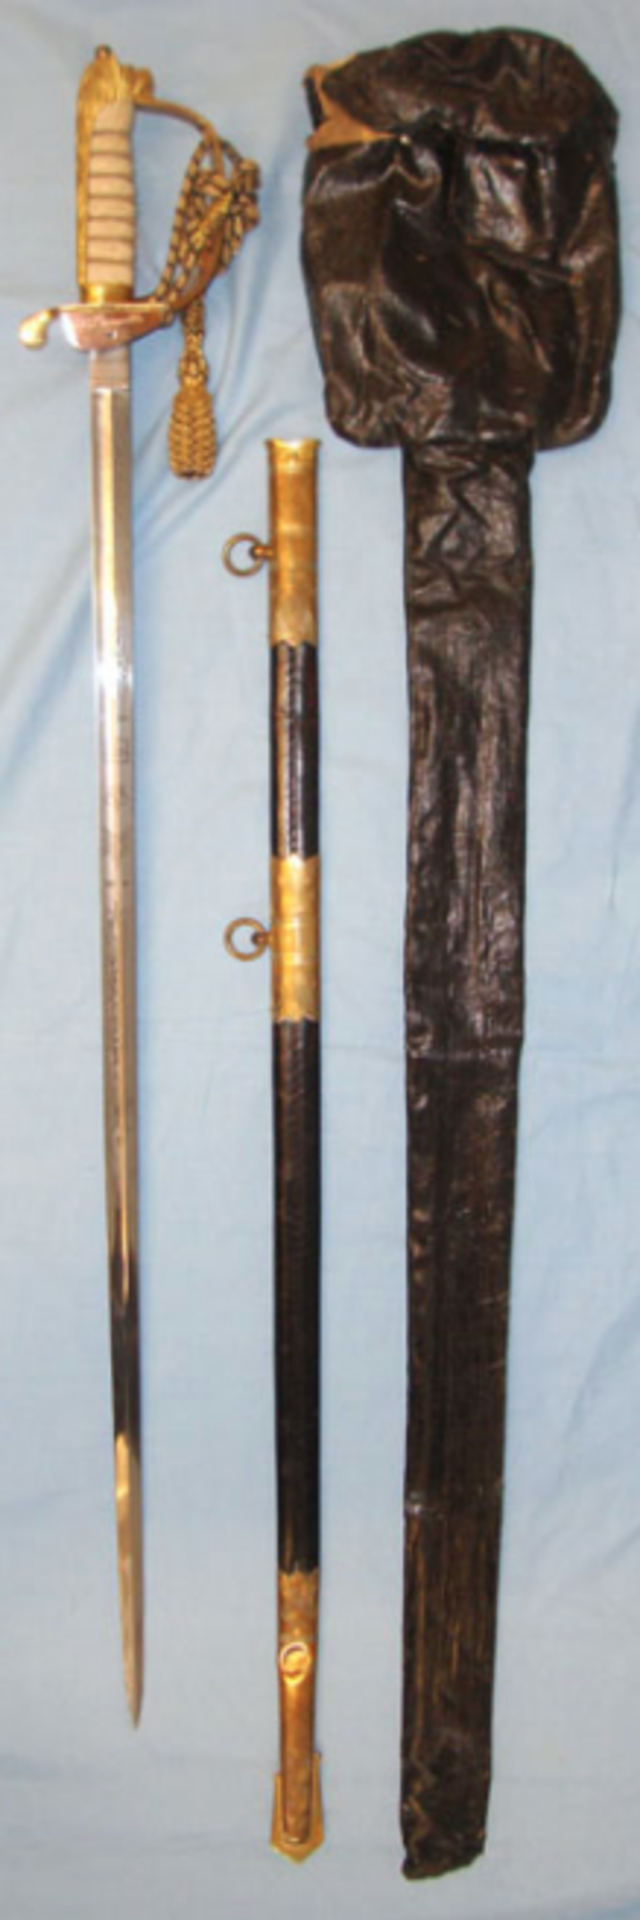 Post 1952 British Royal Navy Officer’s Sword To ‘A.G. Burnett’ By Gieves - Image 3 of 3